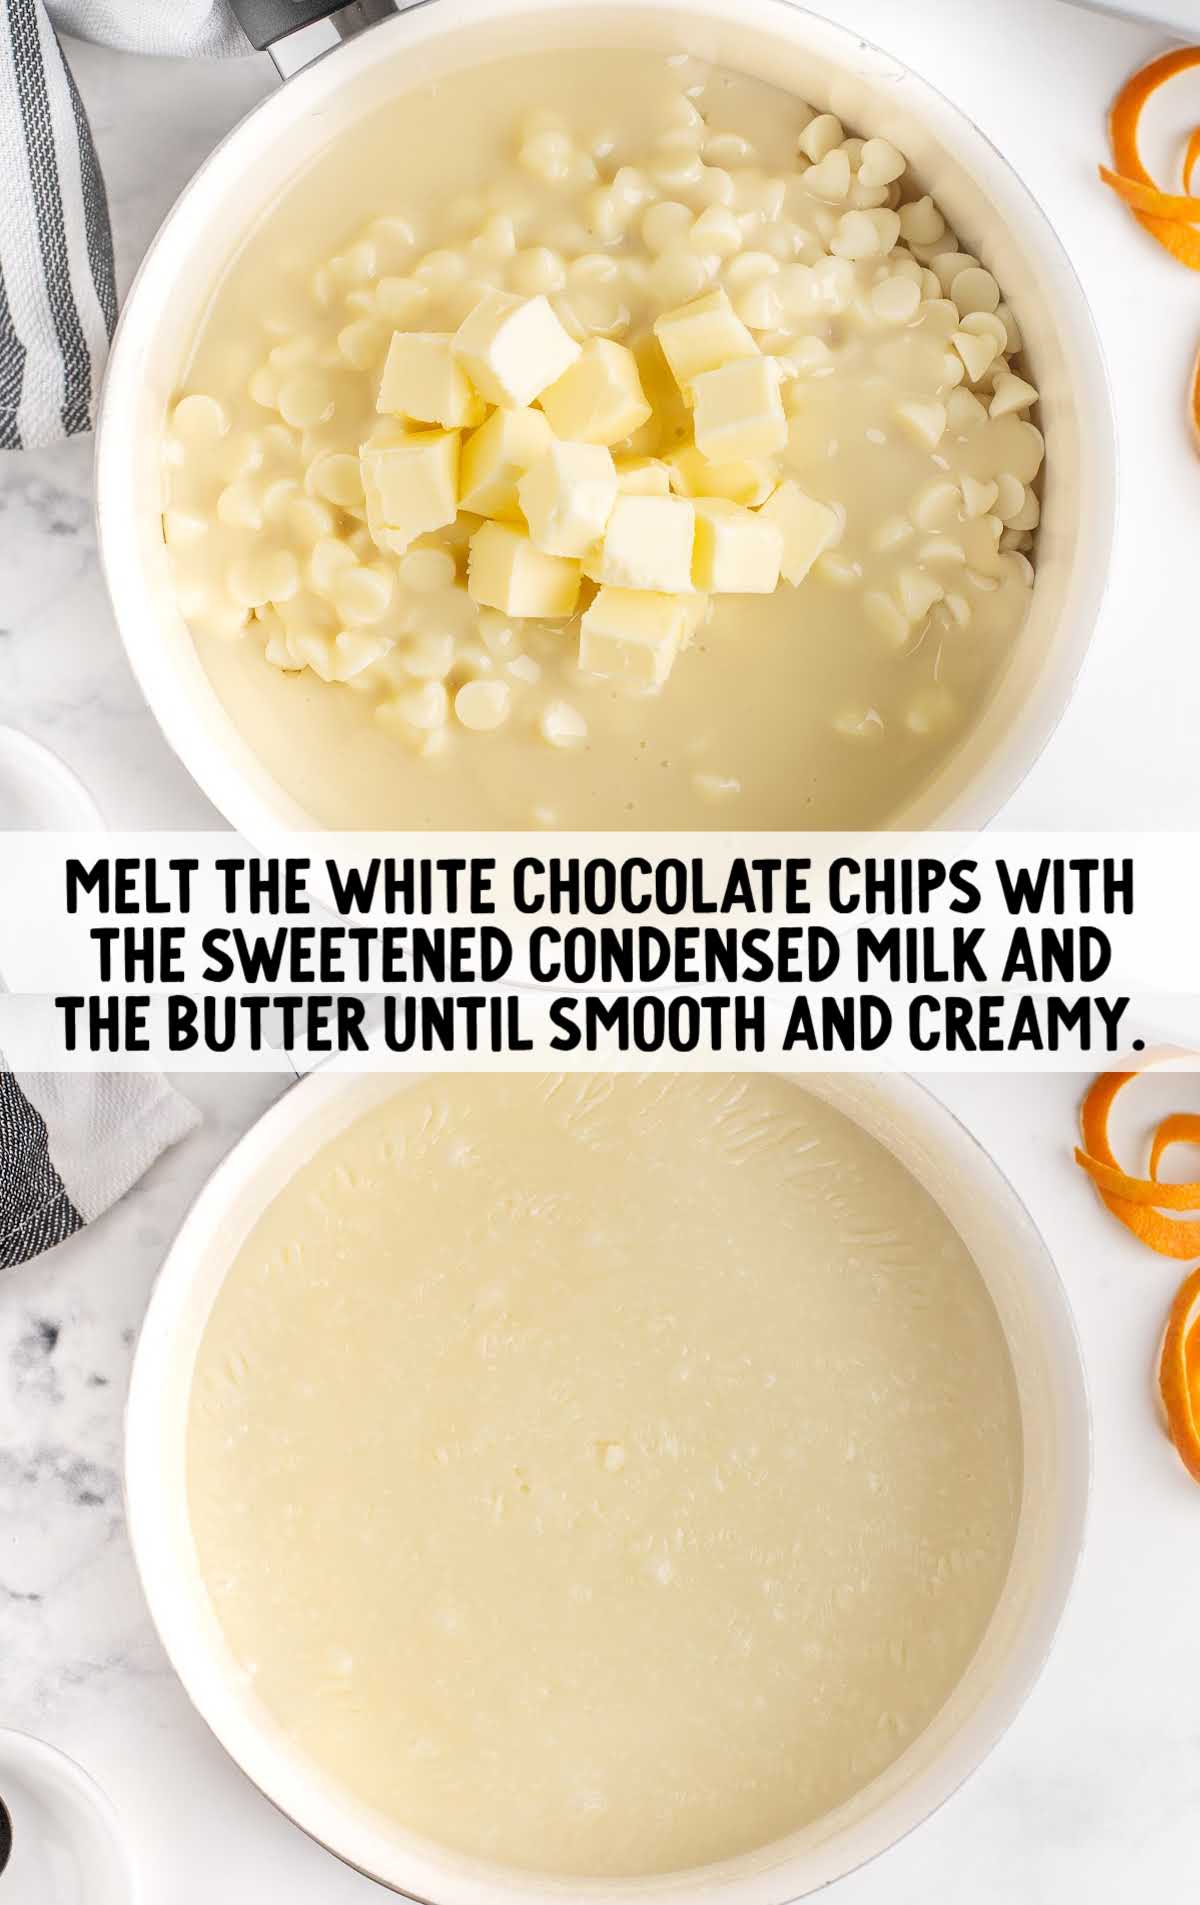 white chocolate chips, milk and butter combined until smooth and creamy